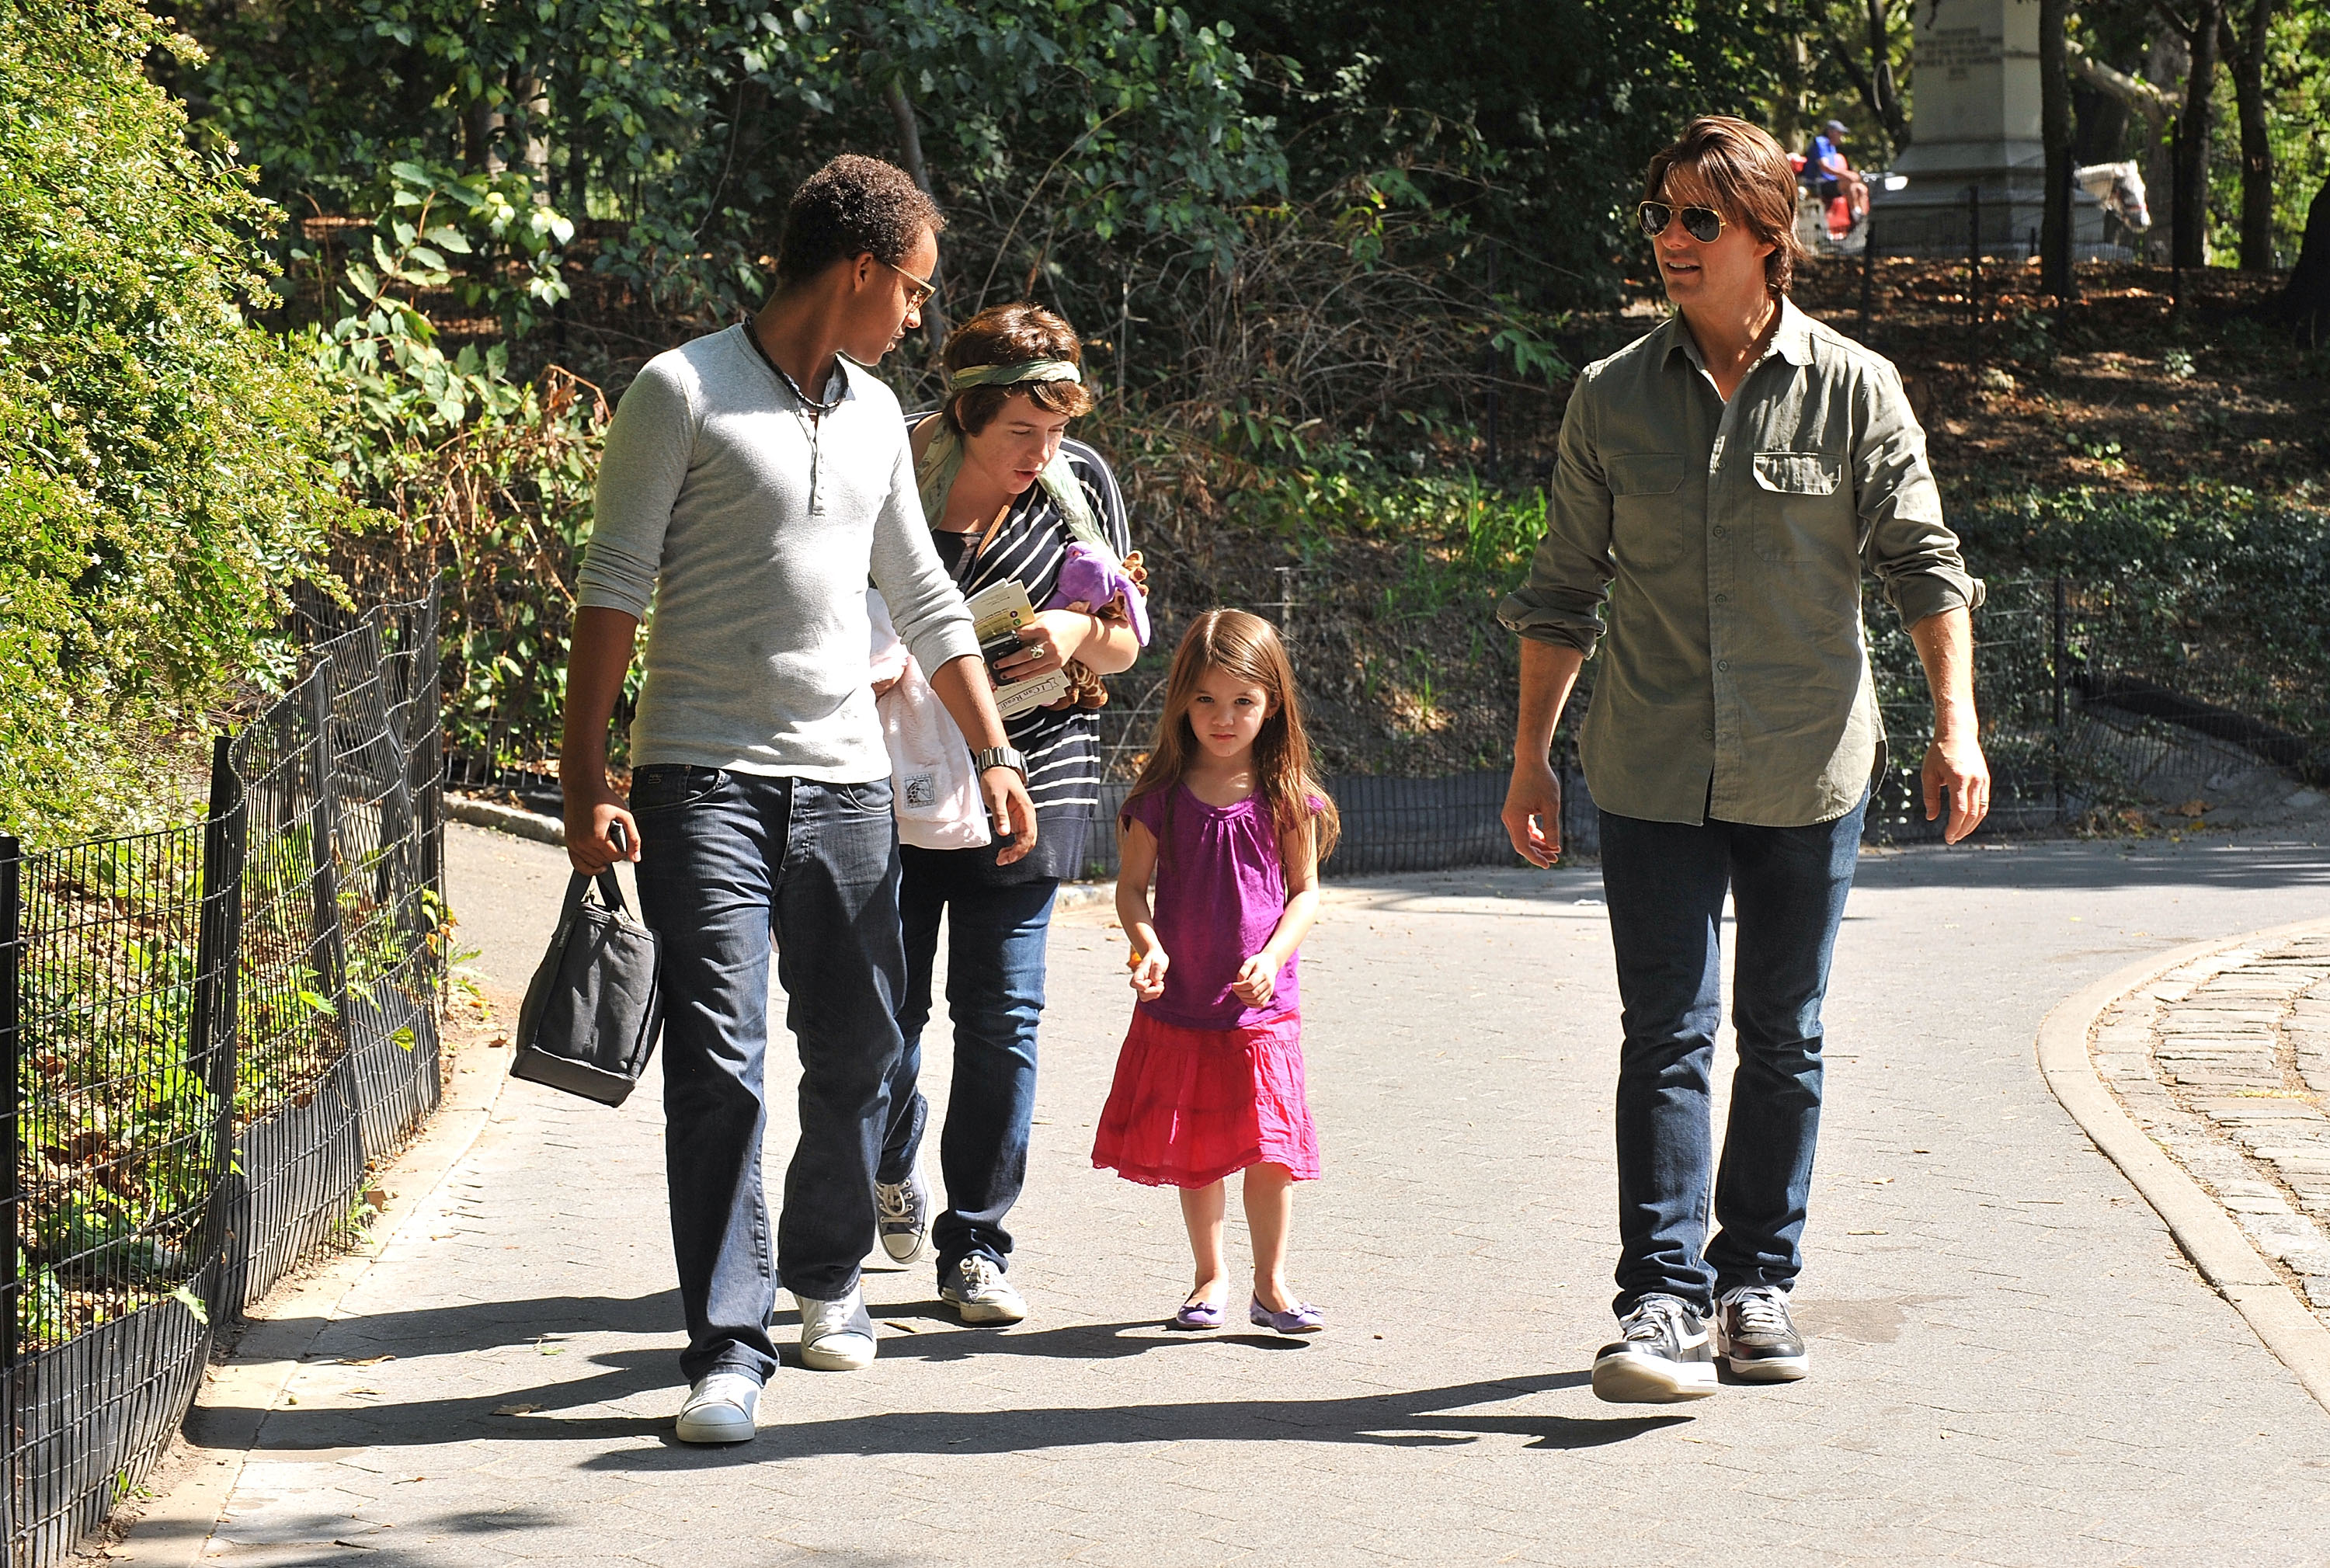 Connor, Isabella, Suri, and Tom Cruise spotted walking in Central Park West in New York City, 2010 | Source: Getty Images